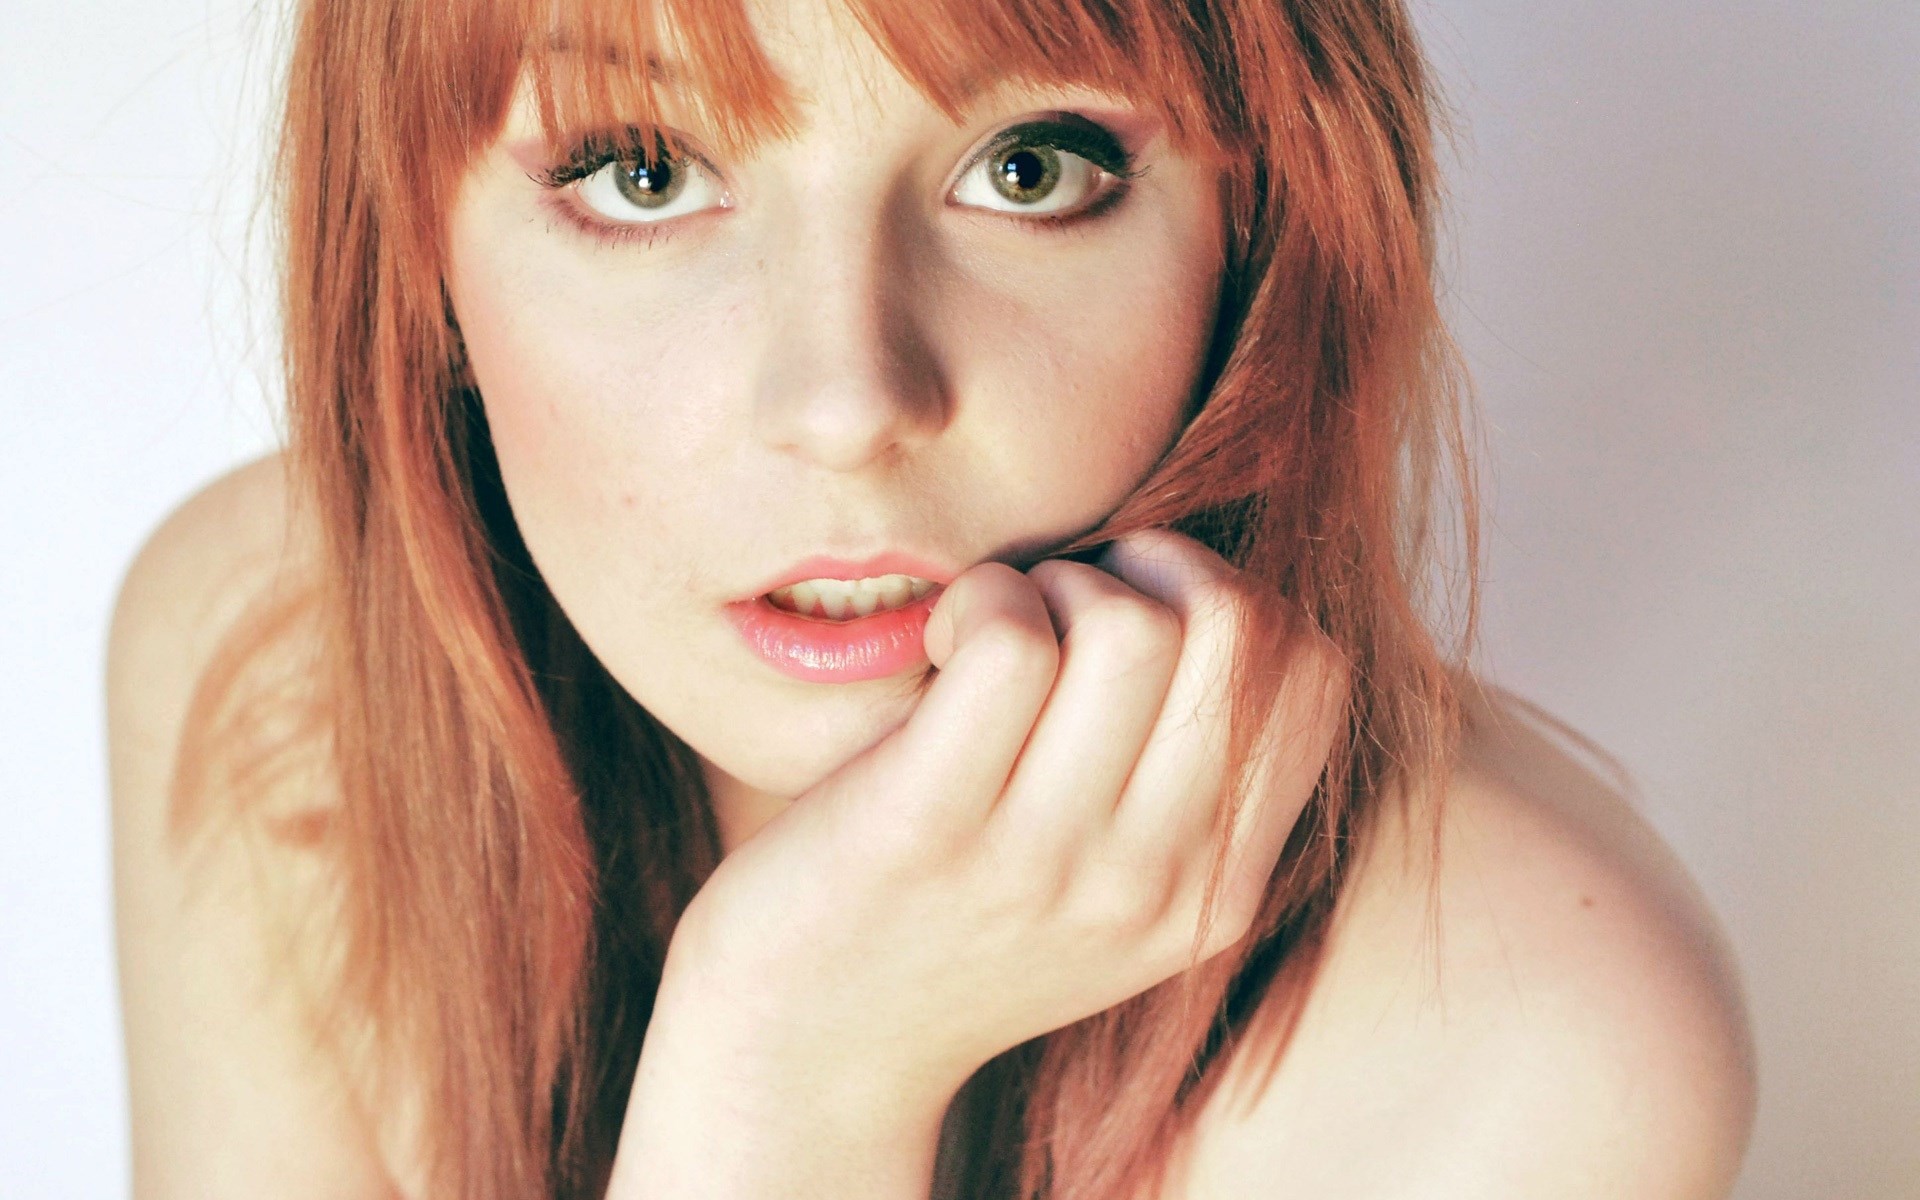 1920x1200 Awesome Lovely Redhead Images Collection: Lovely Redhead Wallpapers